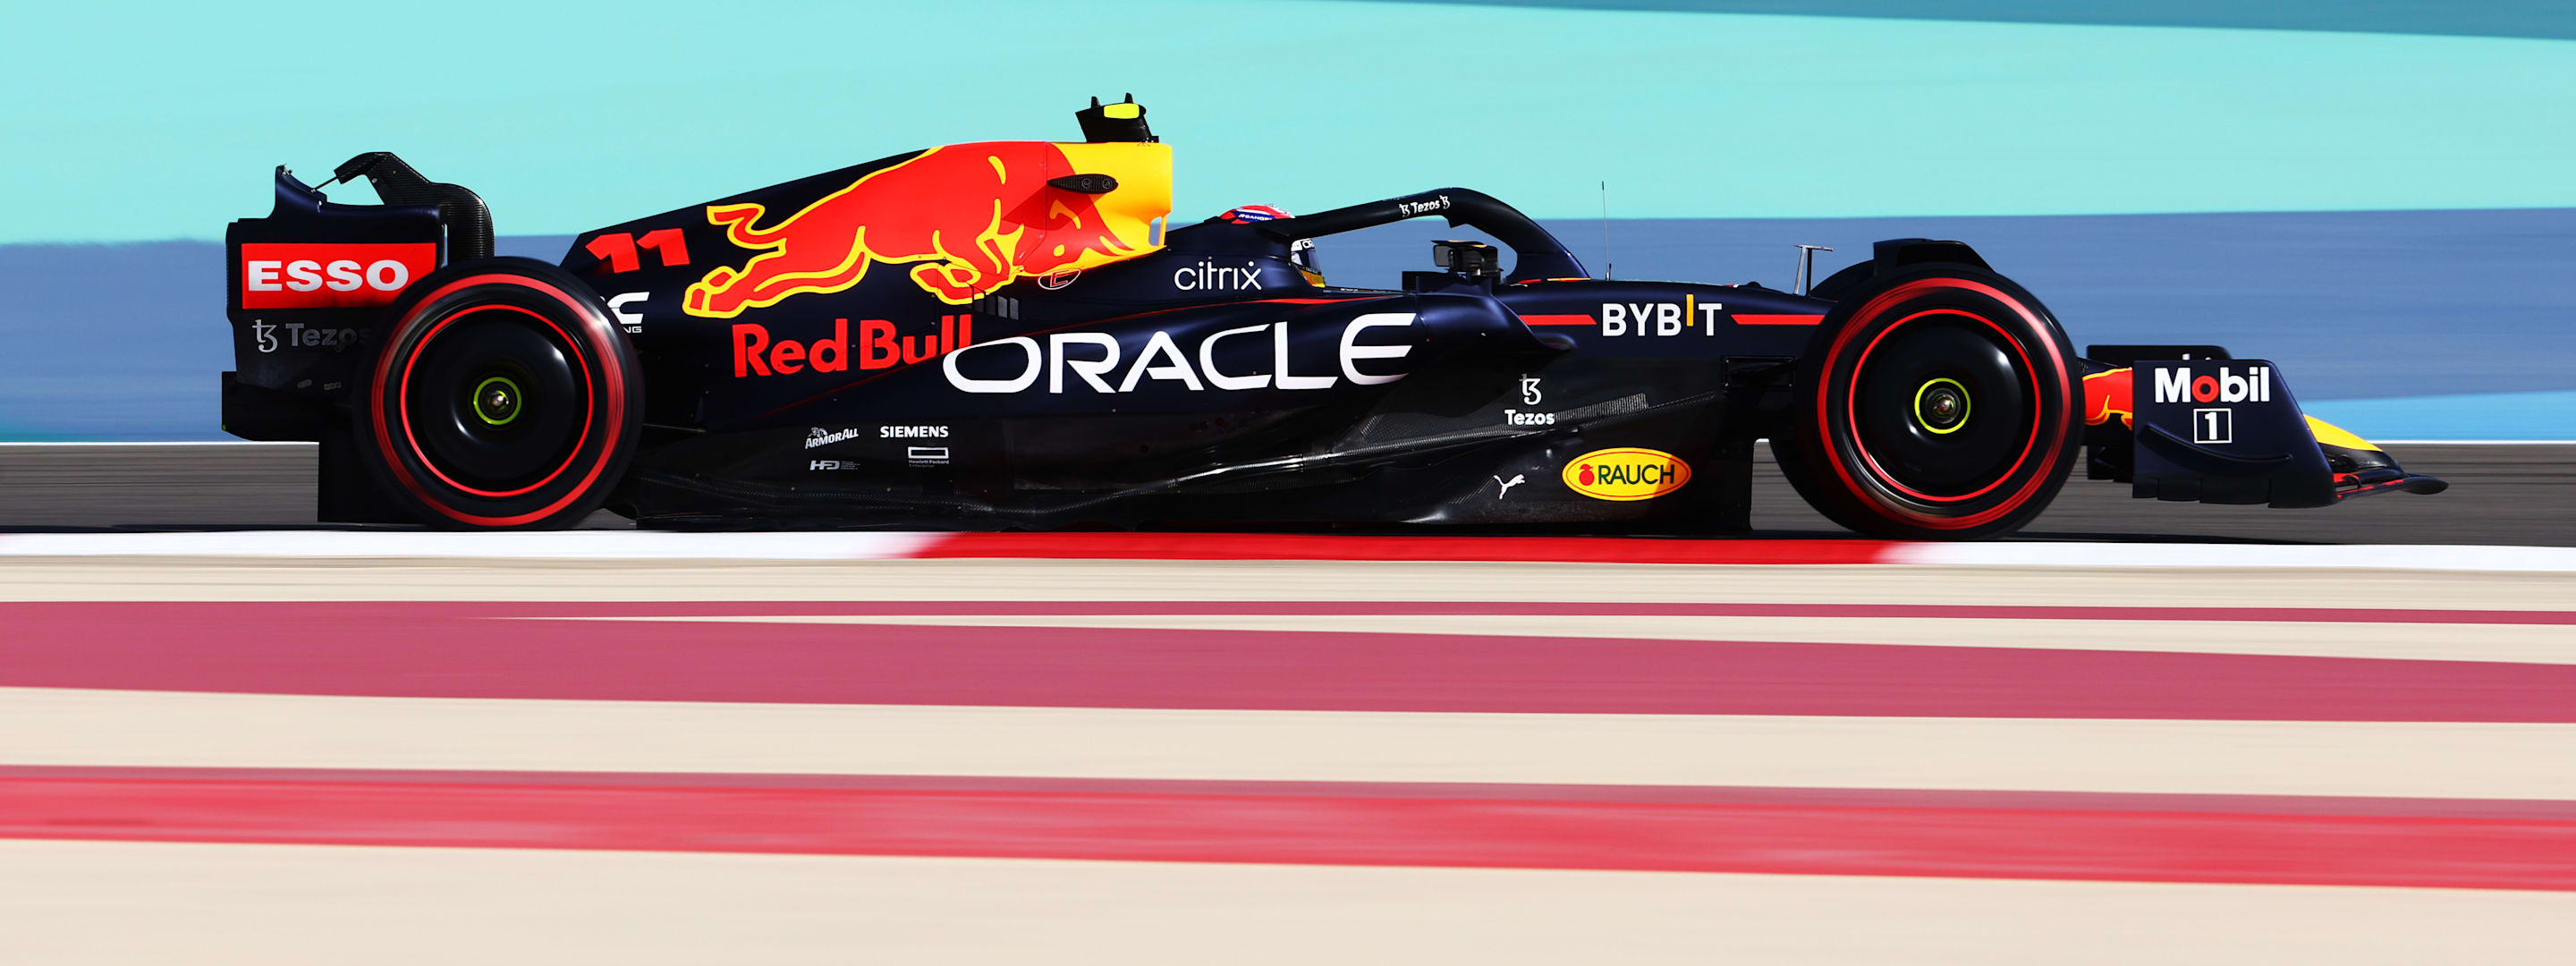 It's Almost Time For The RB18 To Get Racing For The First Time